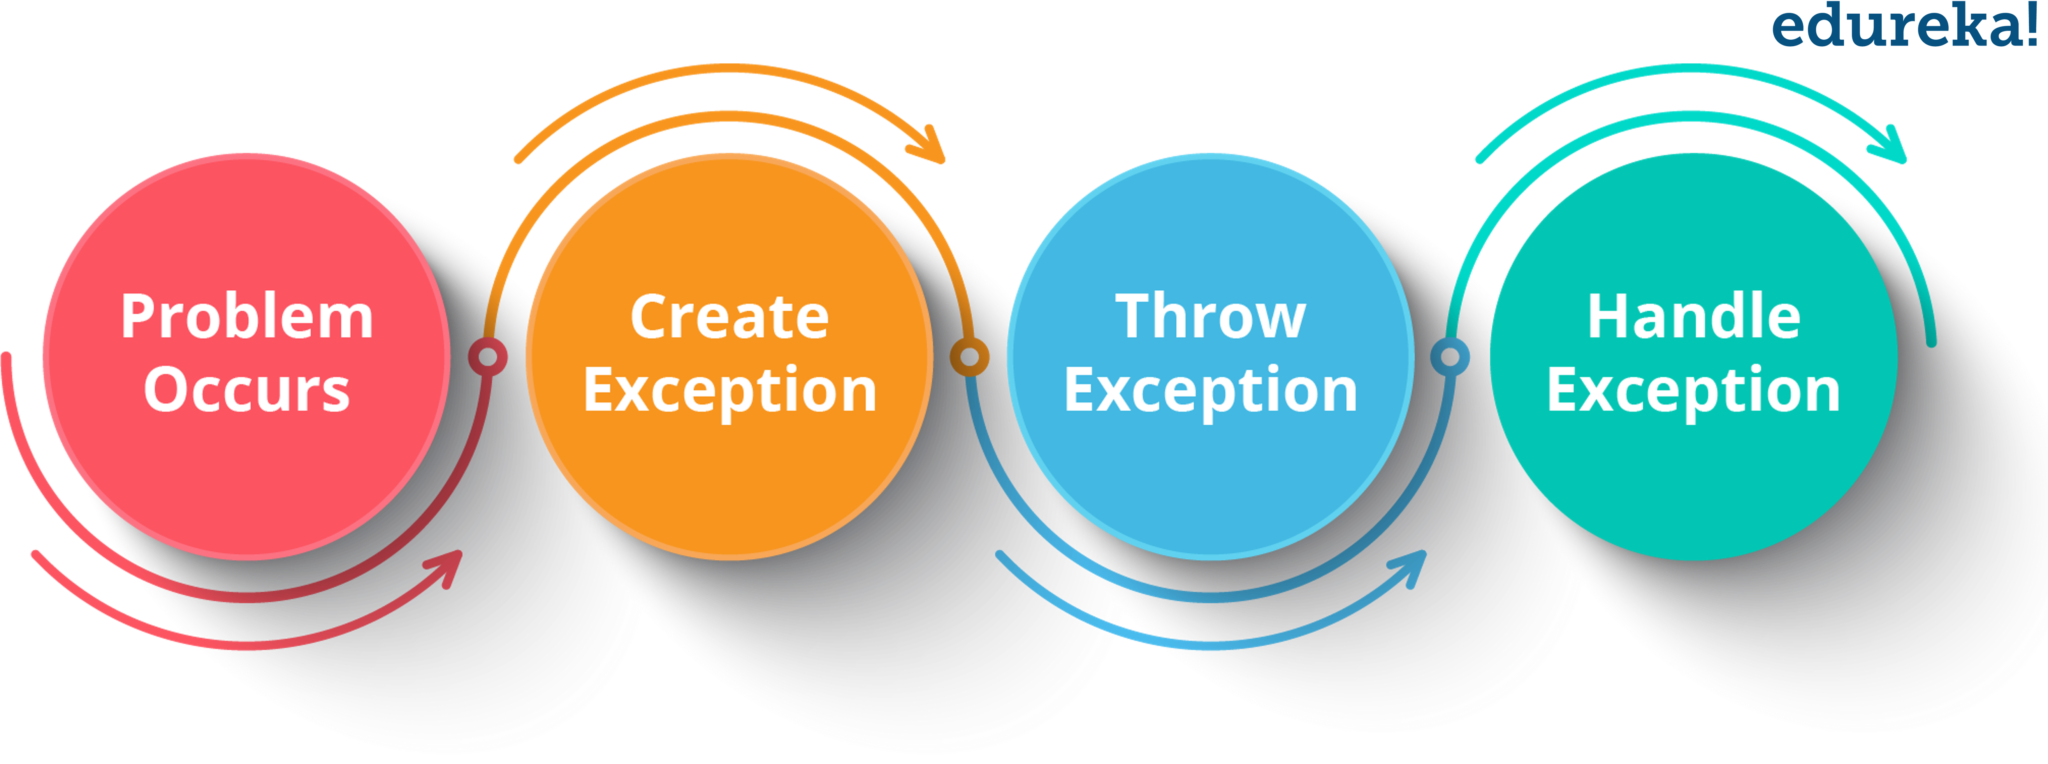 How to Effectively Handle Exceptions